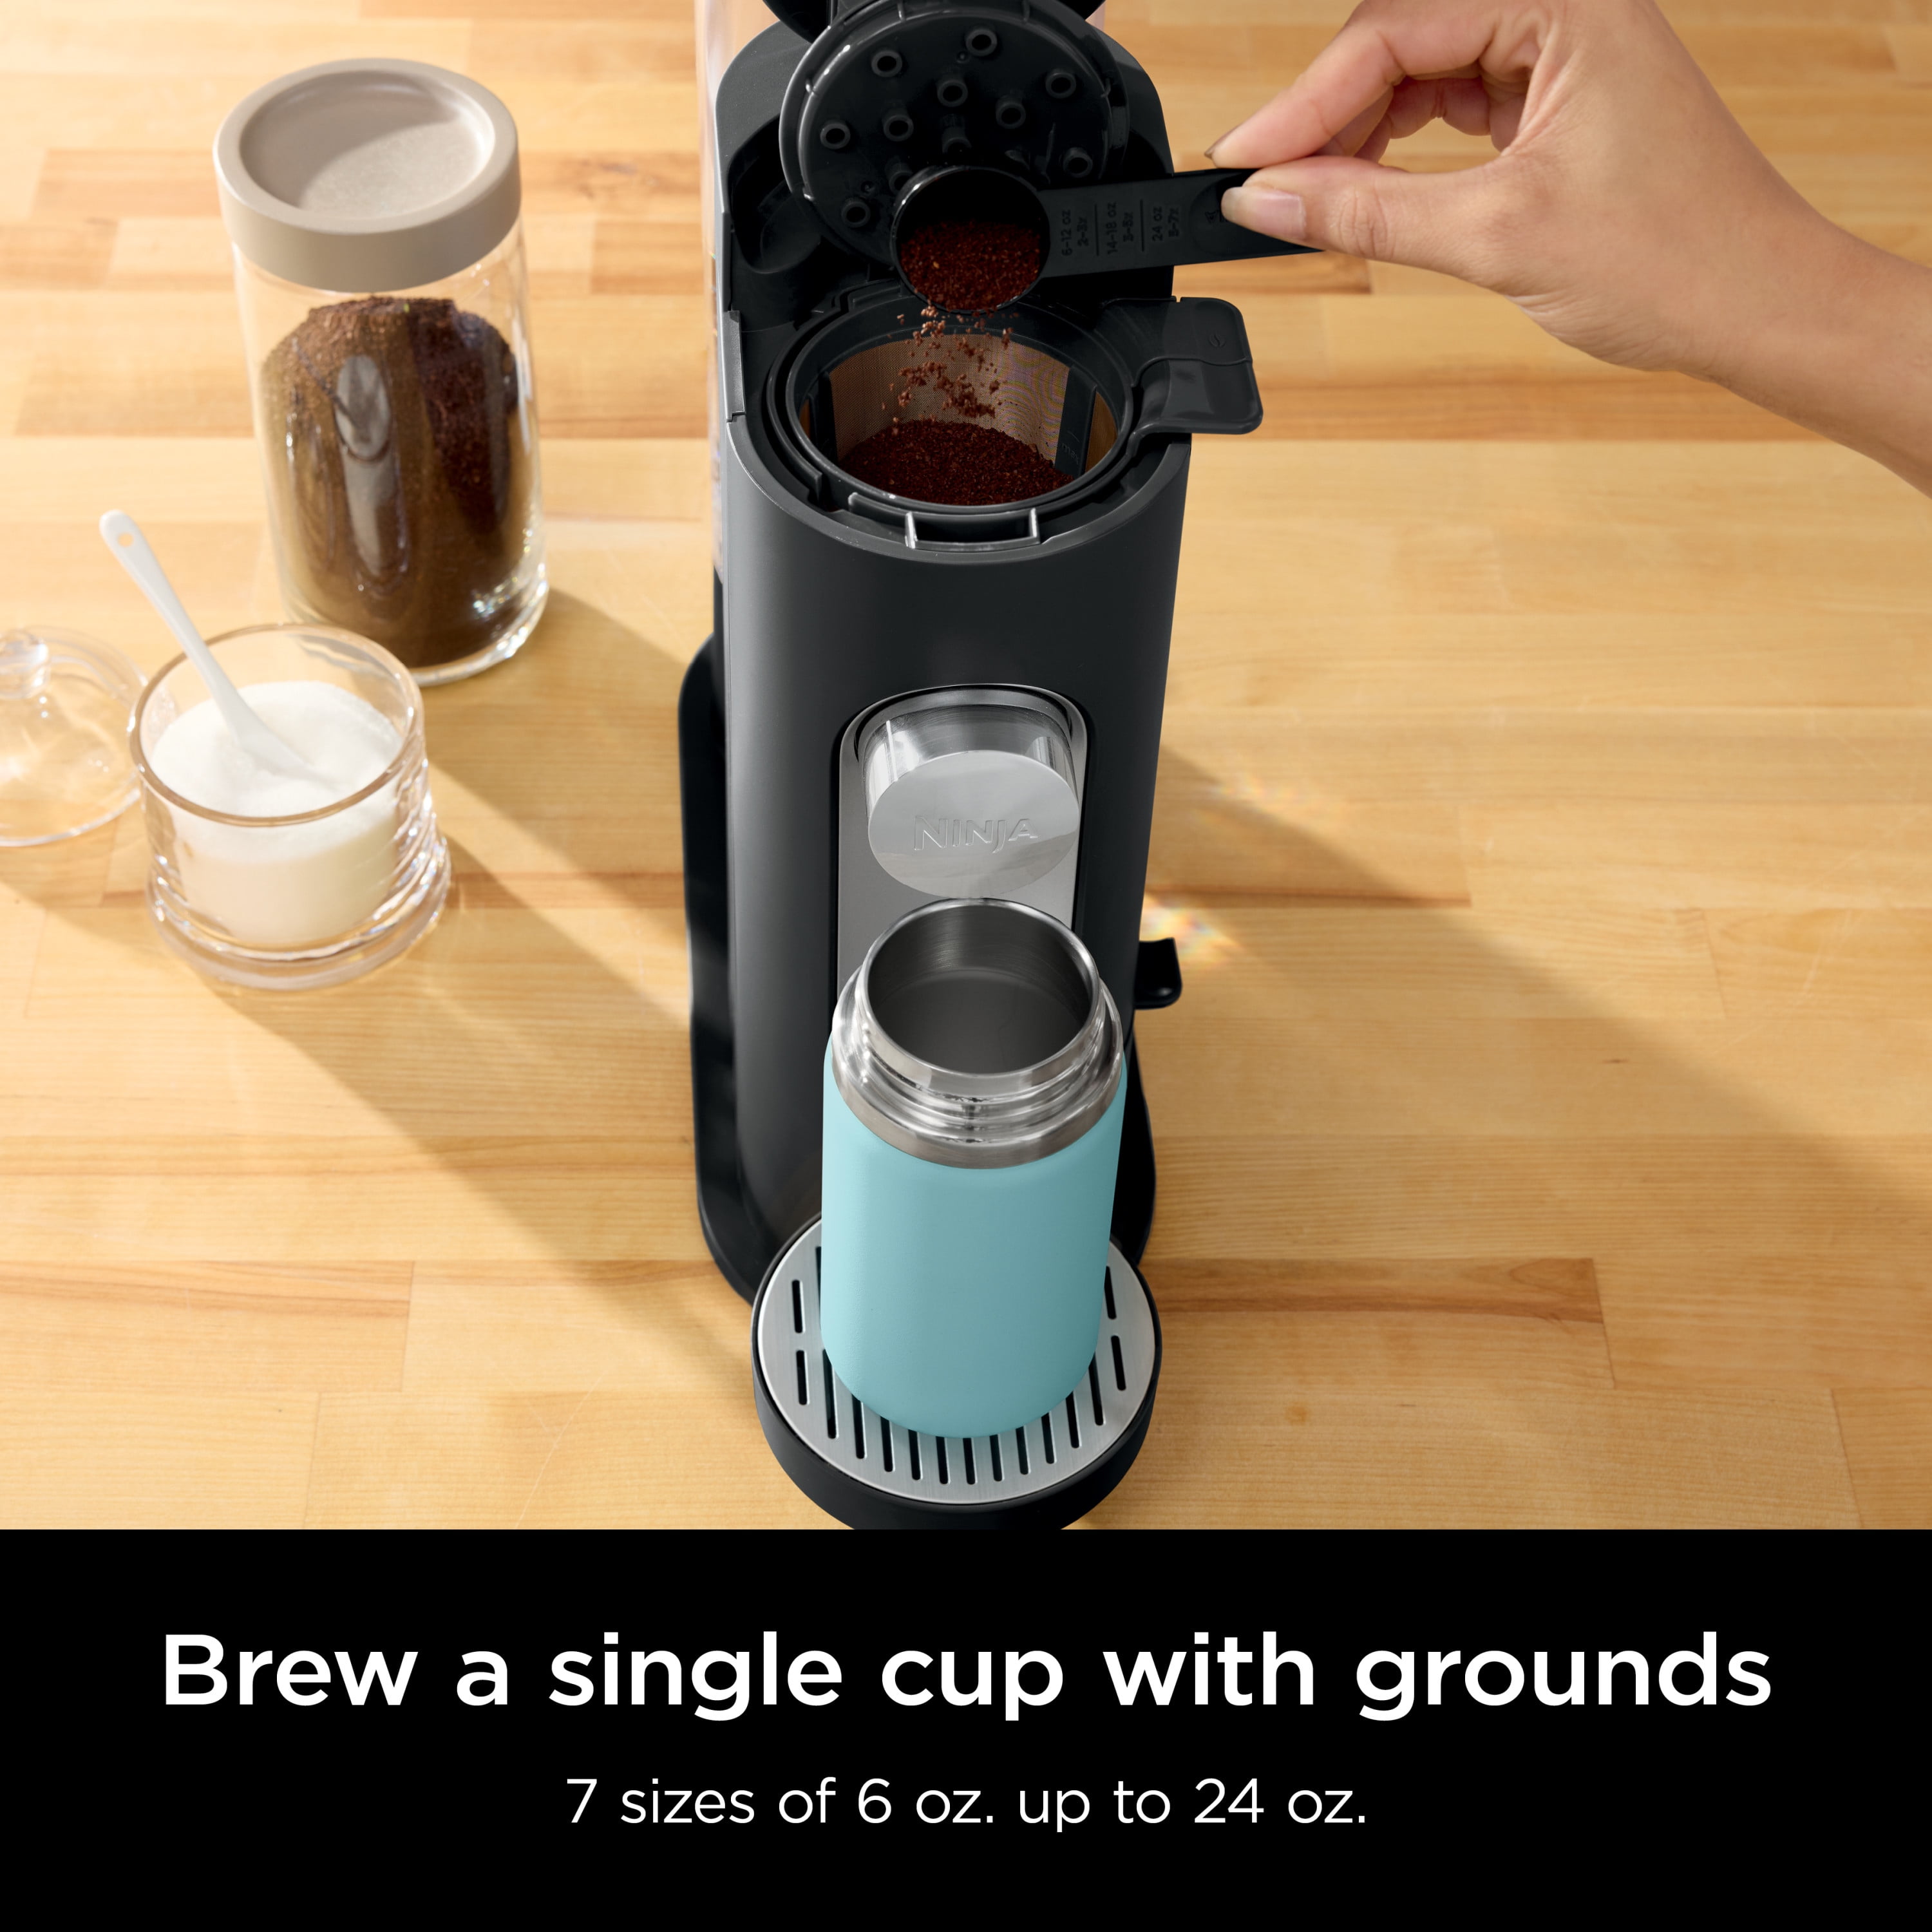 NEW! At Walmart Ninja Pods & Grounds Single Serve K-Cup Iced Coffee Maker  PB040 Review 